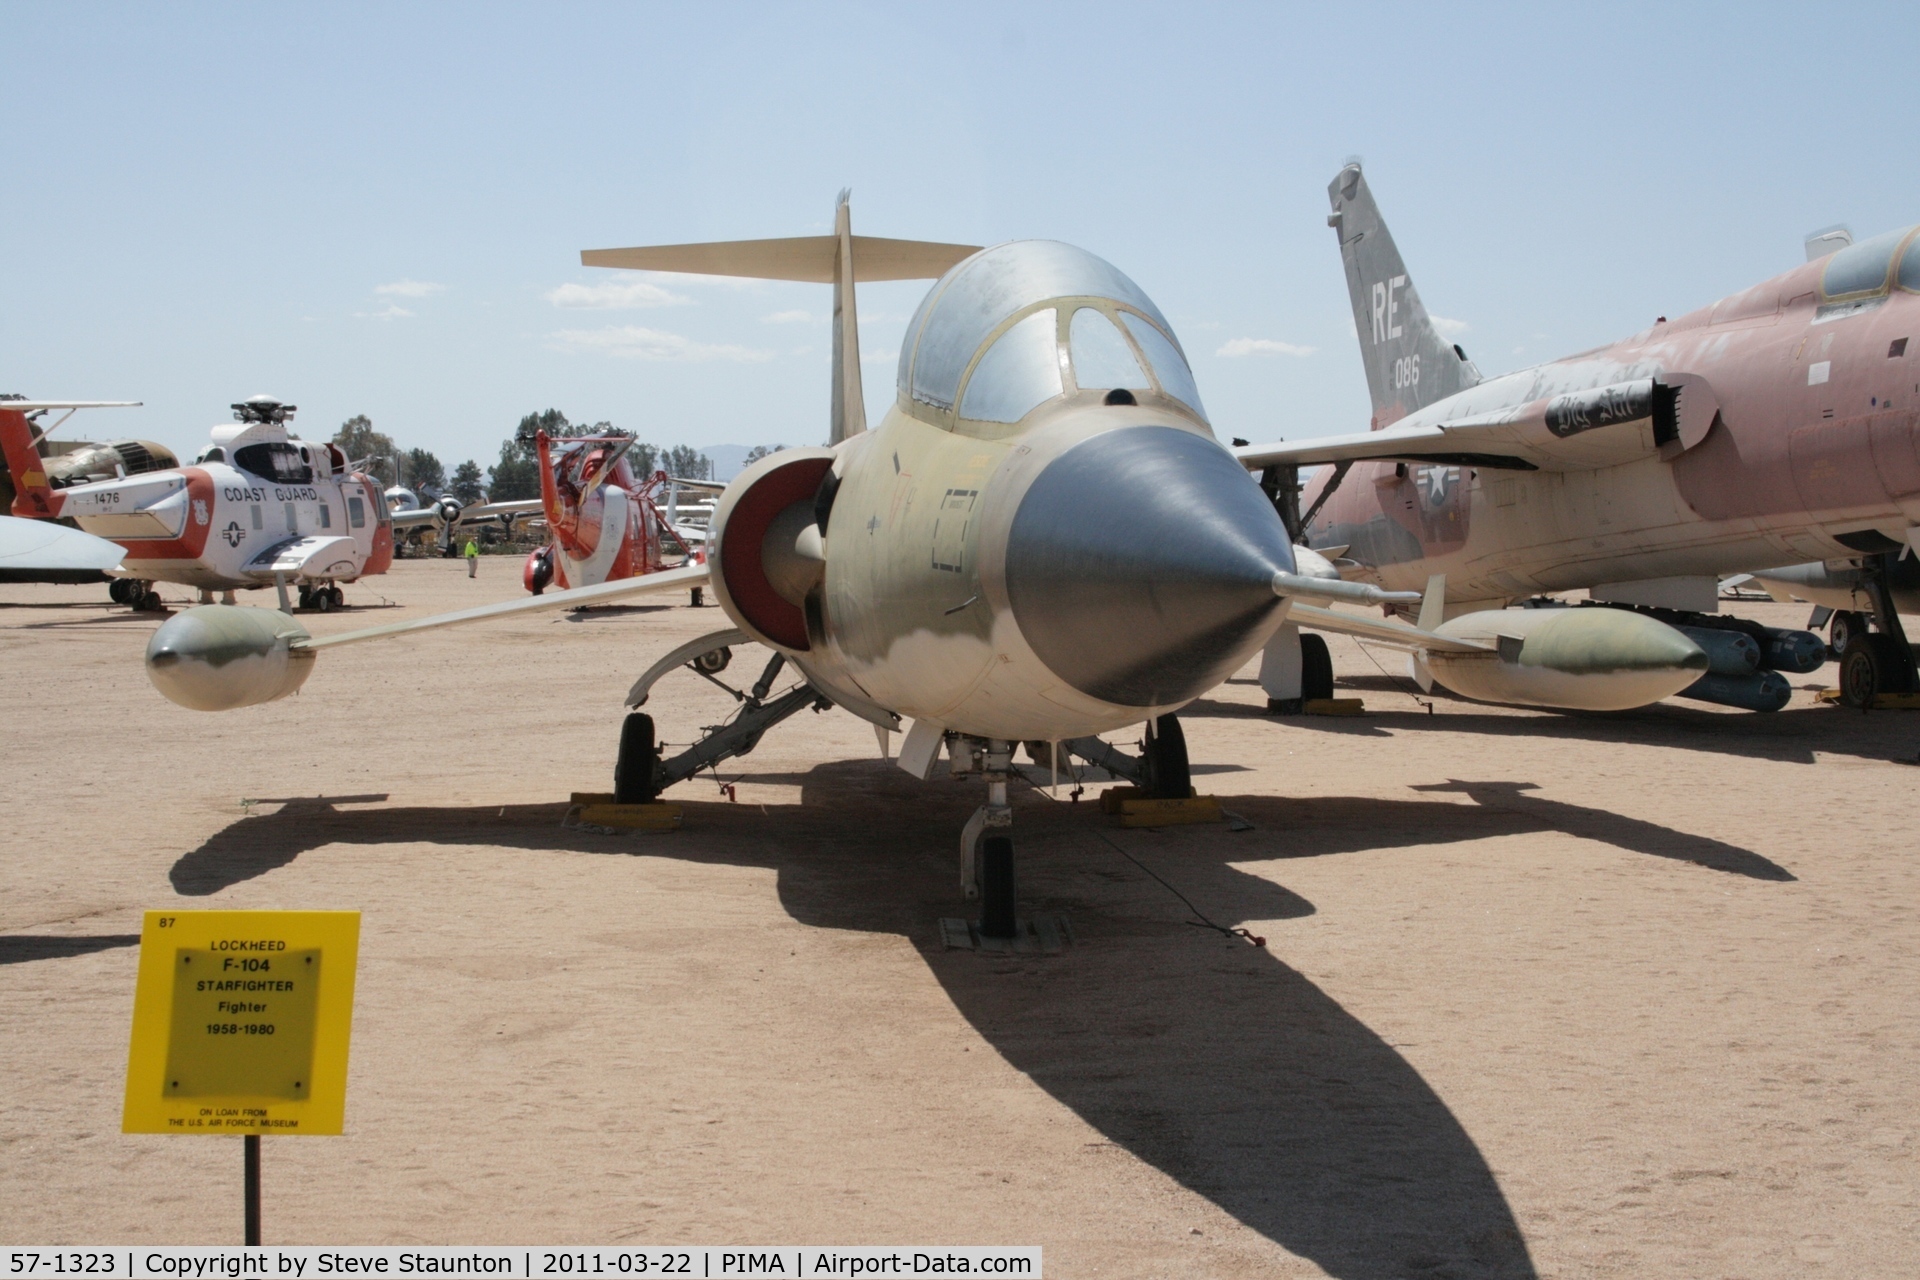 57-1323, 1957 Lockheed F-104D Starfighter C/N 483-5035, Taken at Pima Air and Space Museum, in March 2011 whilst on an Aeroprint Aviation tour